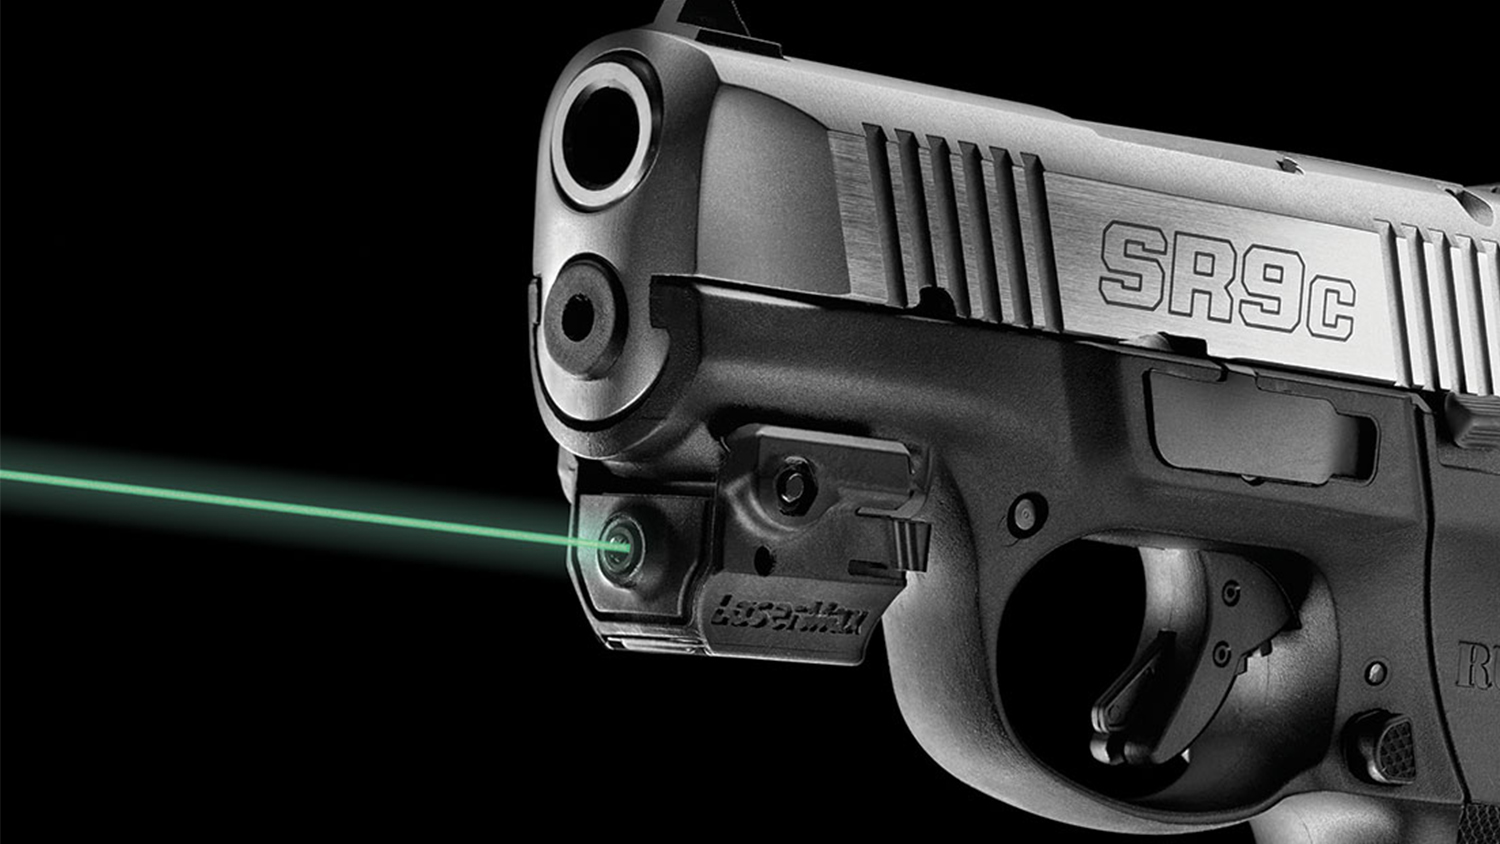 What You Need To Know About Laser Sights